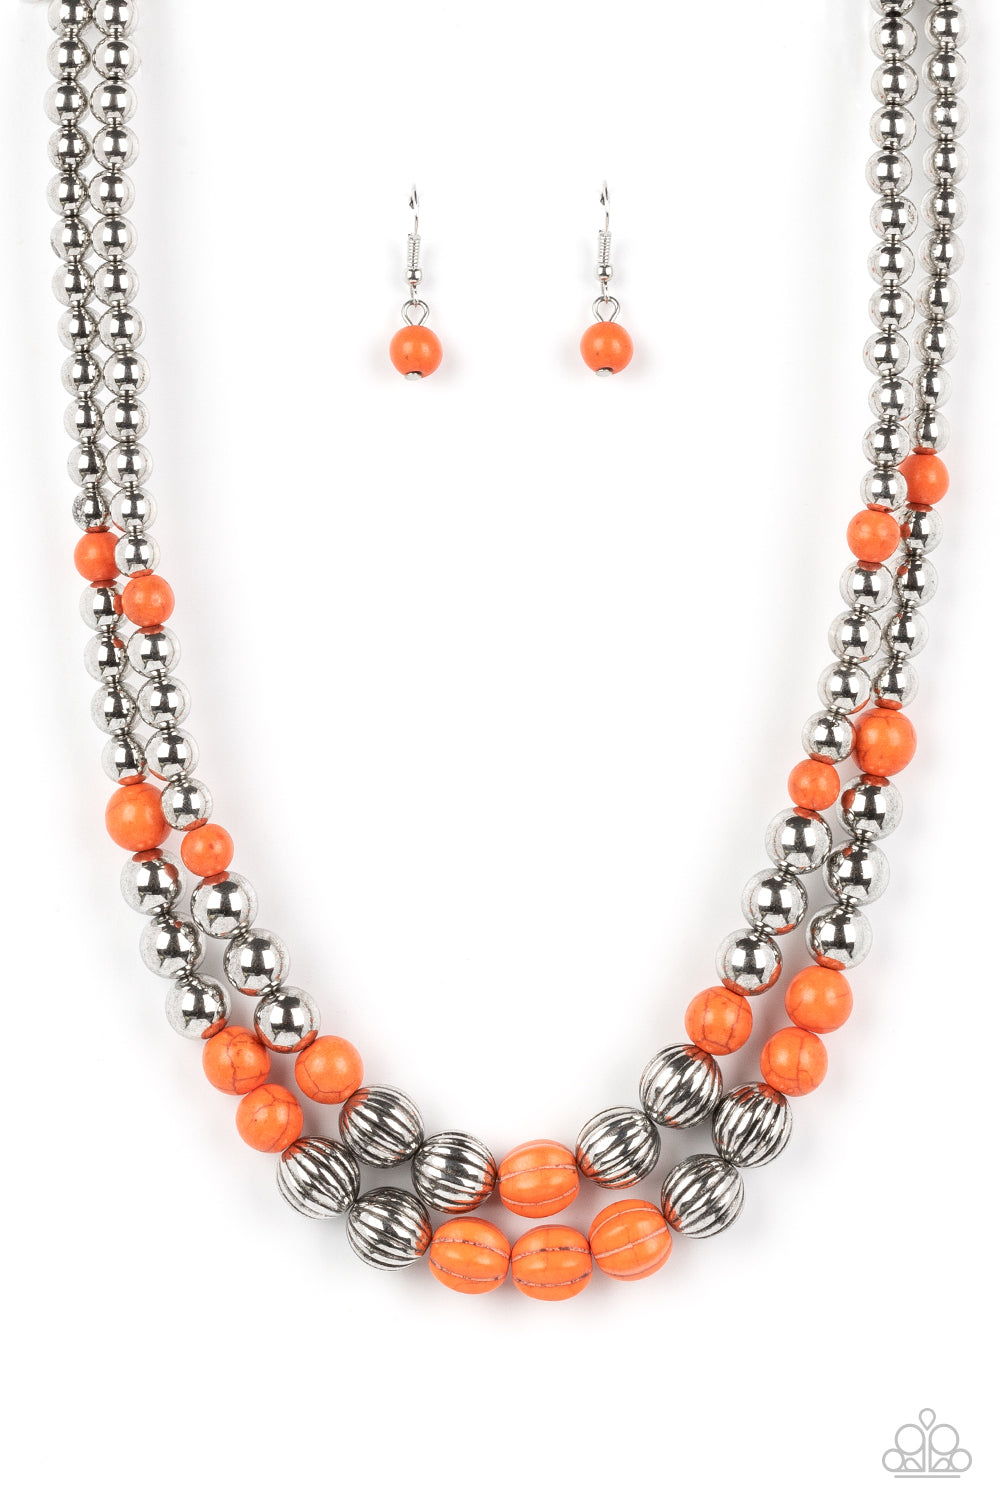 Gradually increasing in size, a refreshing series of shiny silver beads, orange stones, and faux orange stone accents